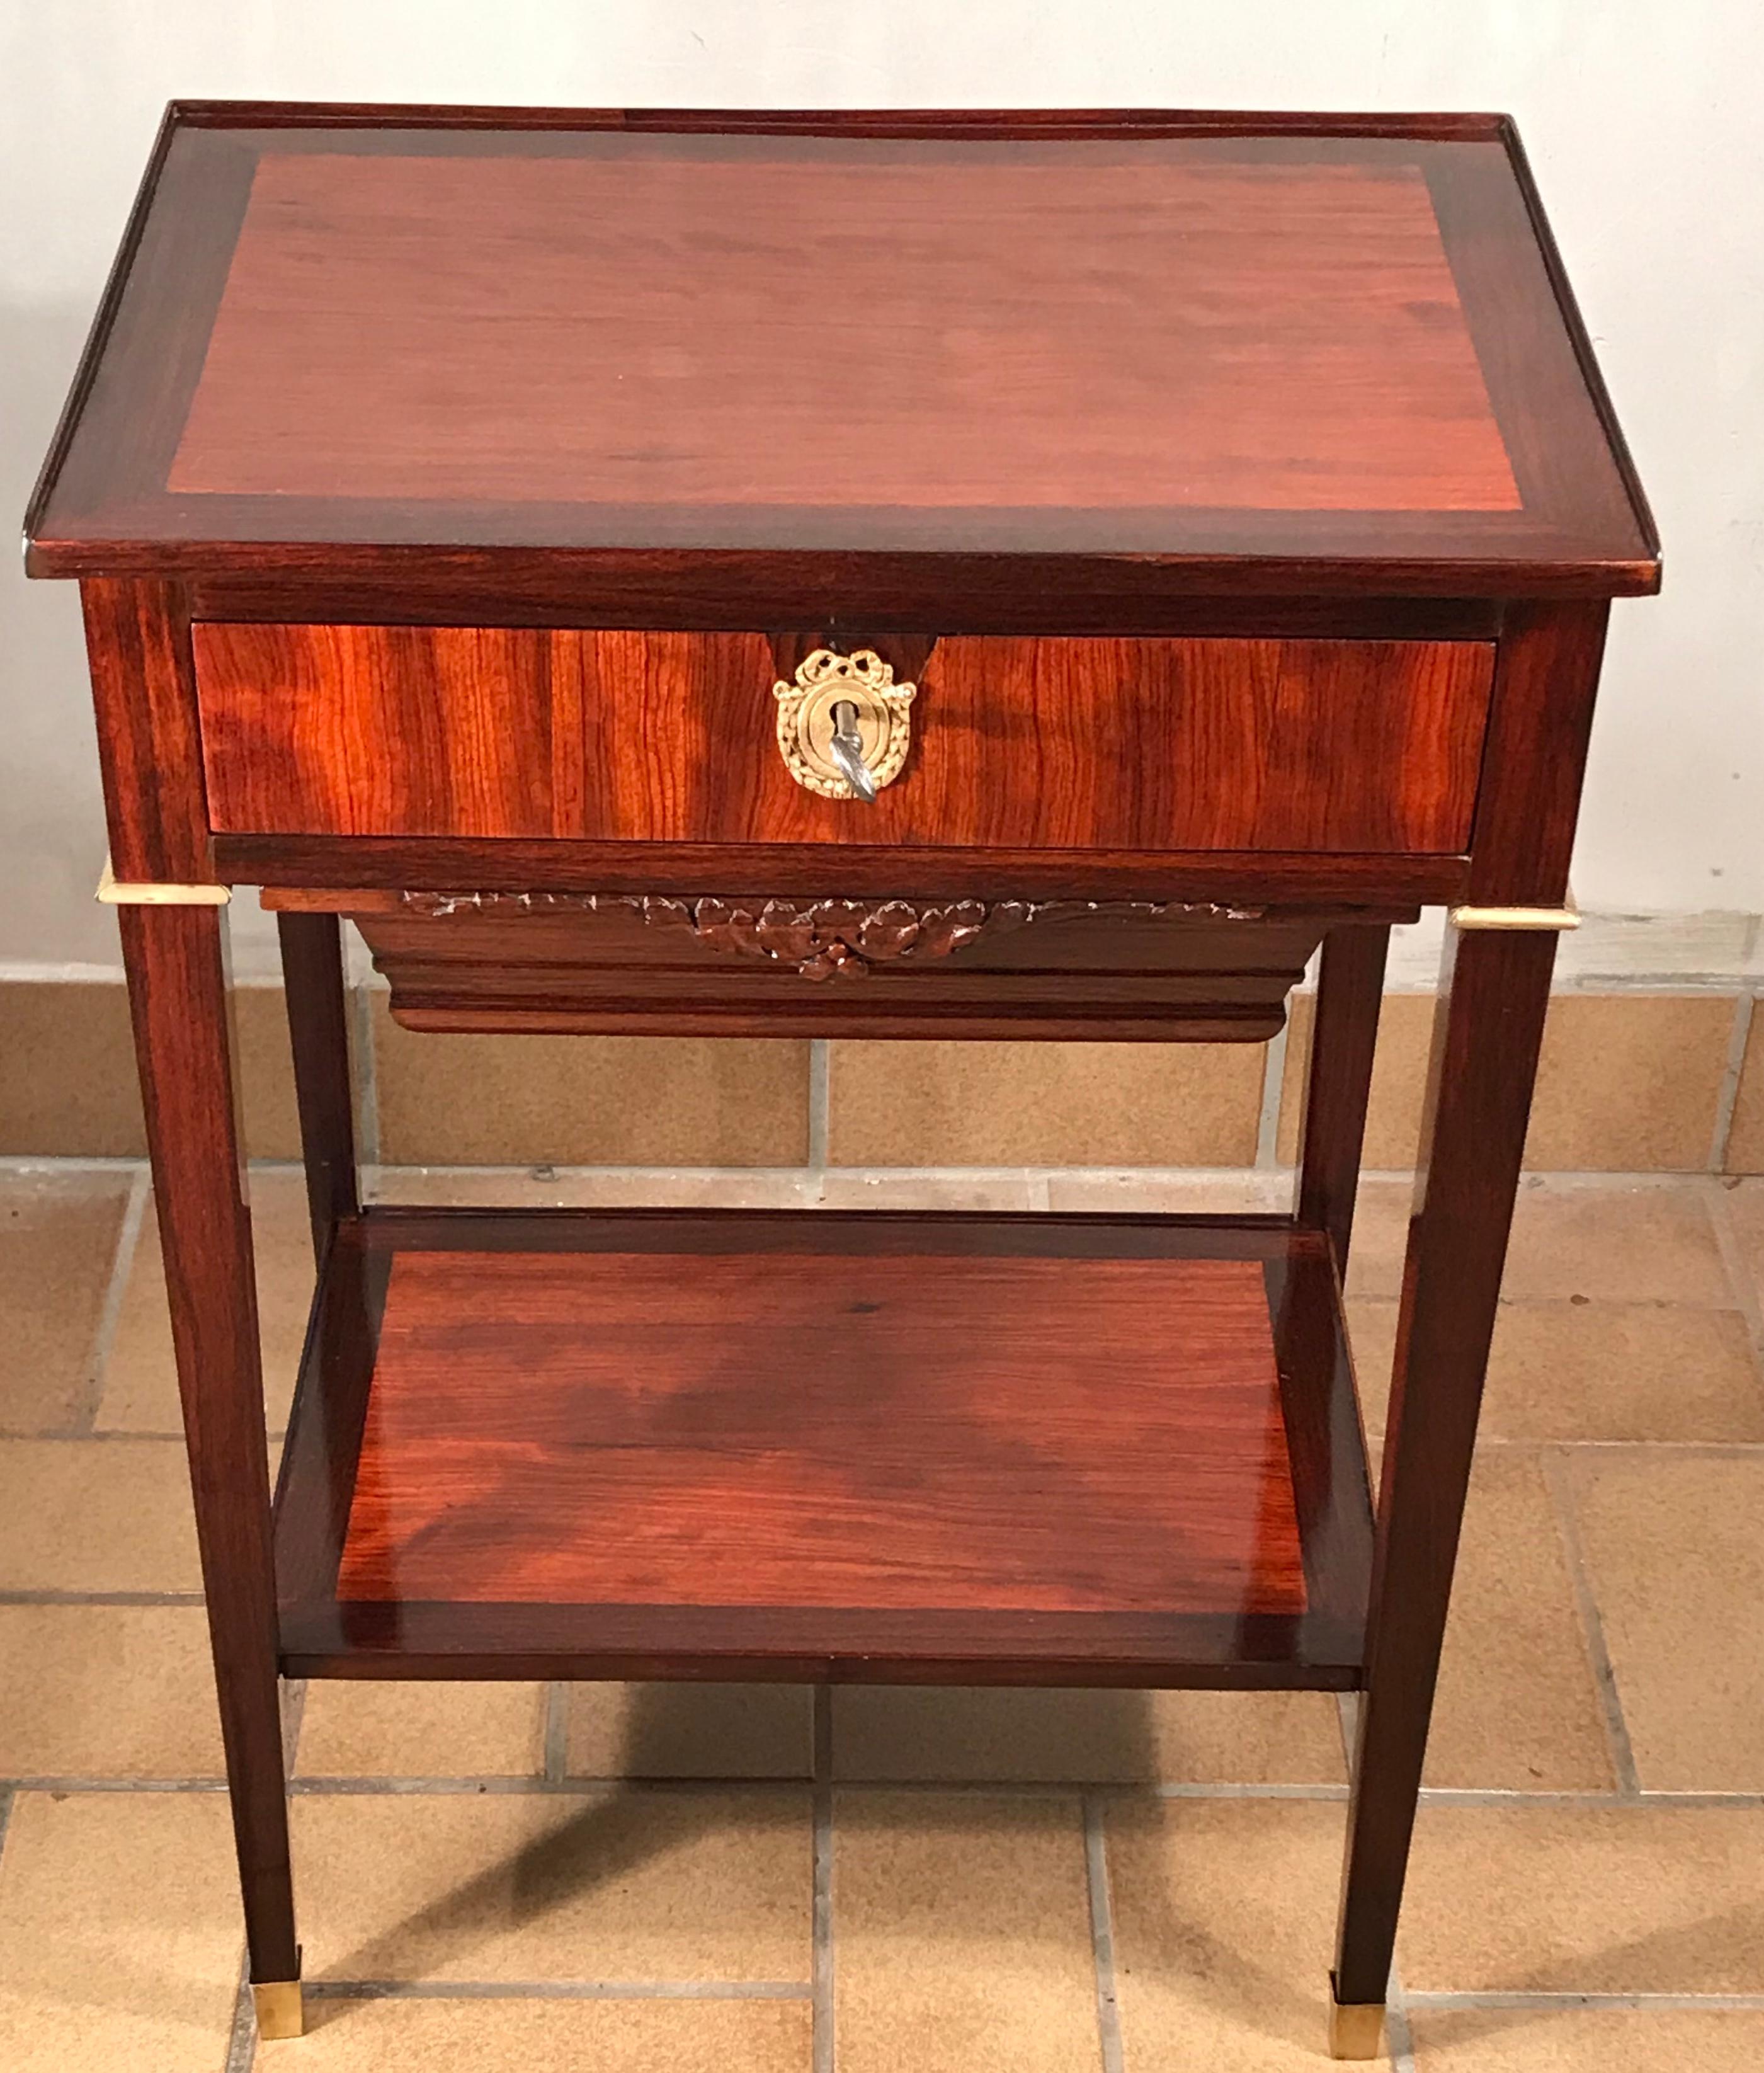 French sewing or side table, Charles X or Restoration style 1810-1820.
The table is embellished with a beautiful satinwood and kingwood veneer. It has one central drawer and below that a drawer for wool with a nicely decorated front. Furthermore,